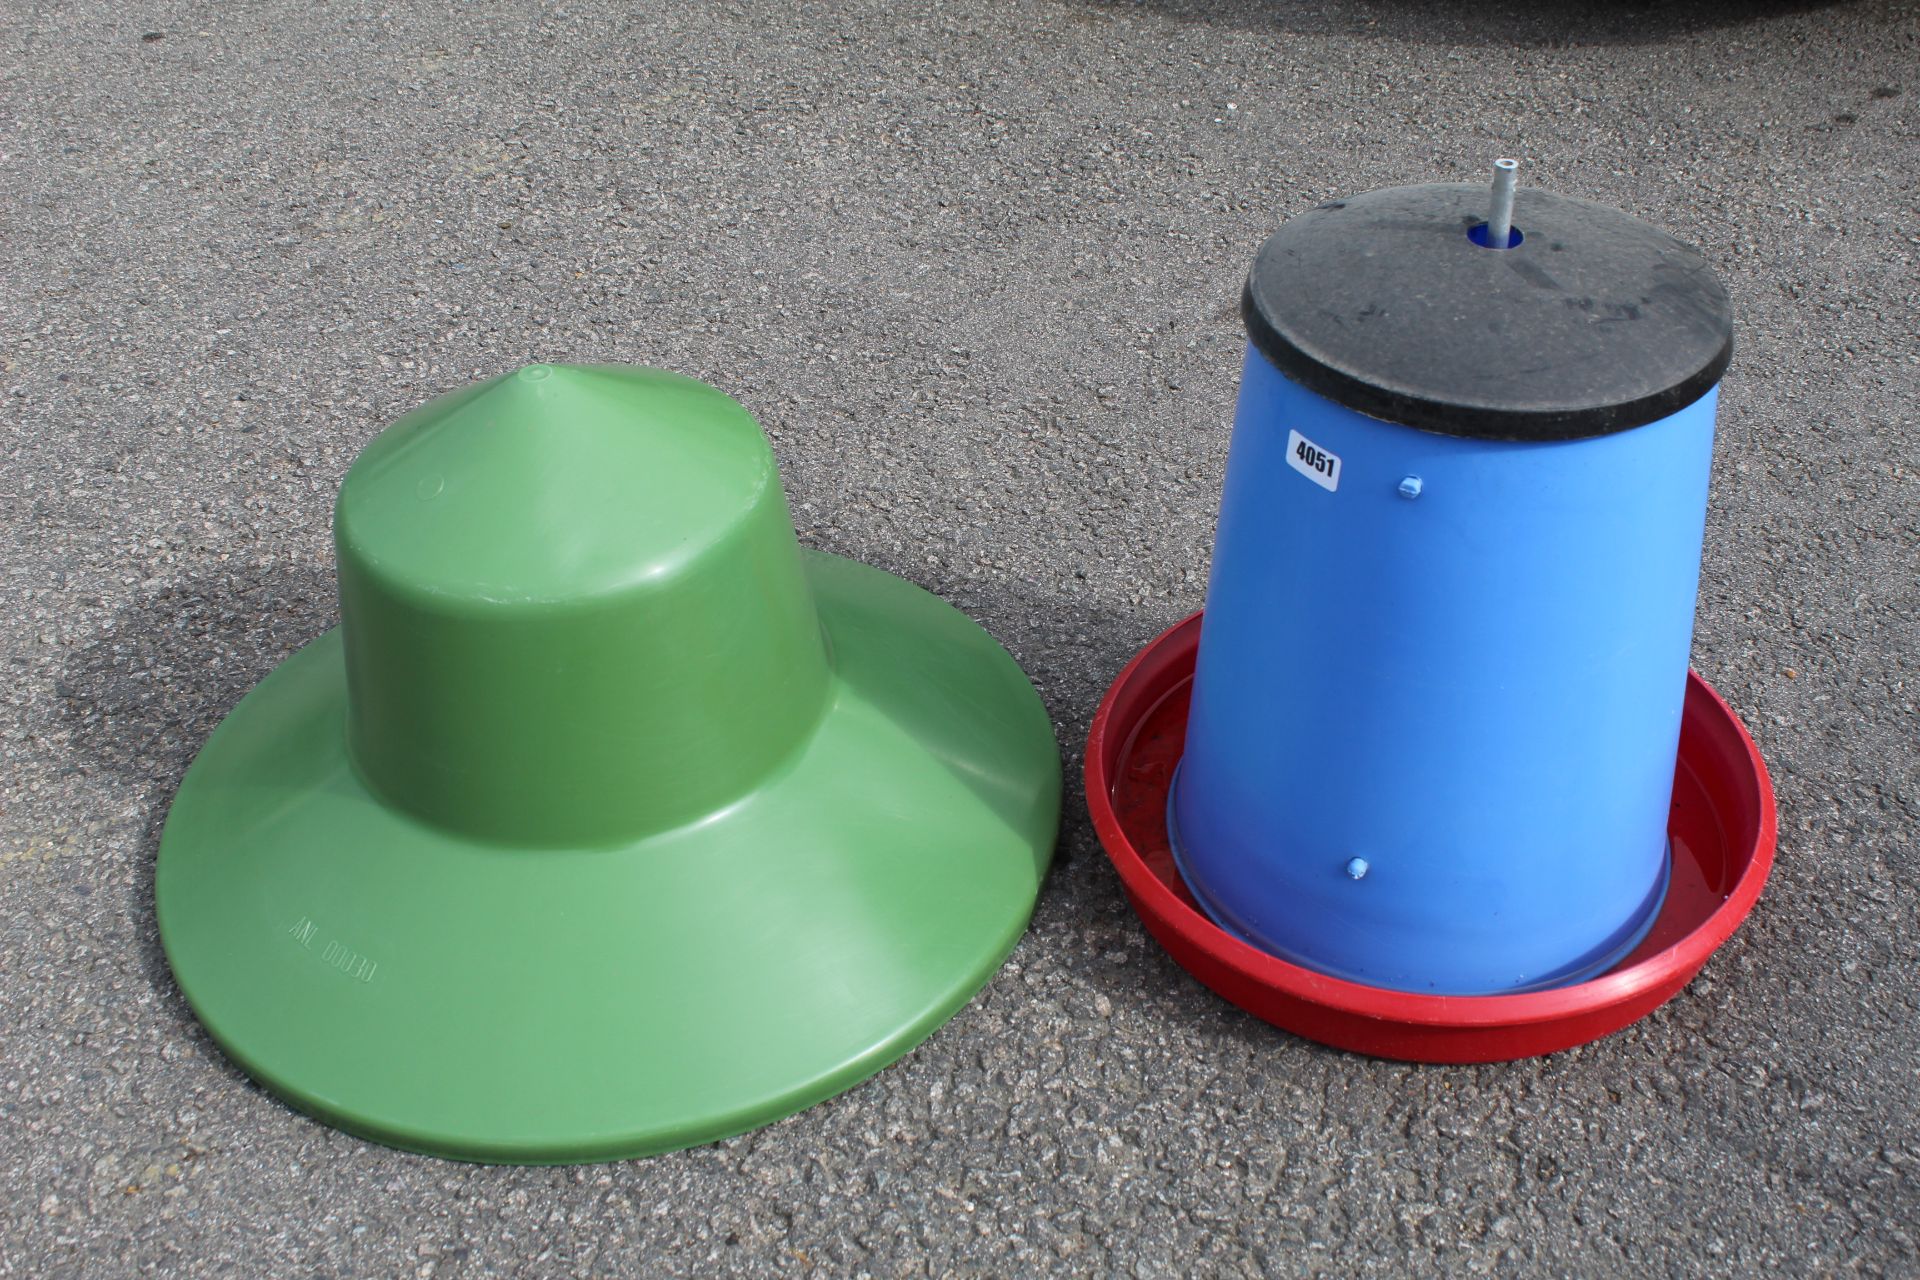 12 x Manola Feeder Outdoor feeders with green top hat covers by Quill Productions - Image 2 of 2